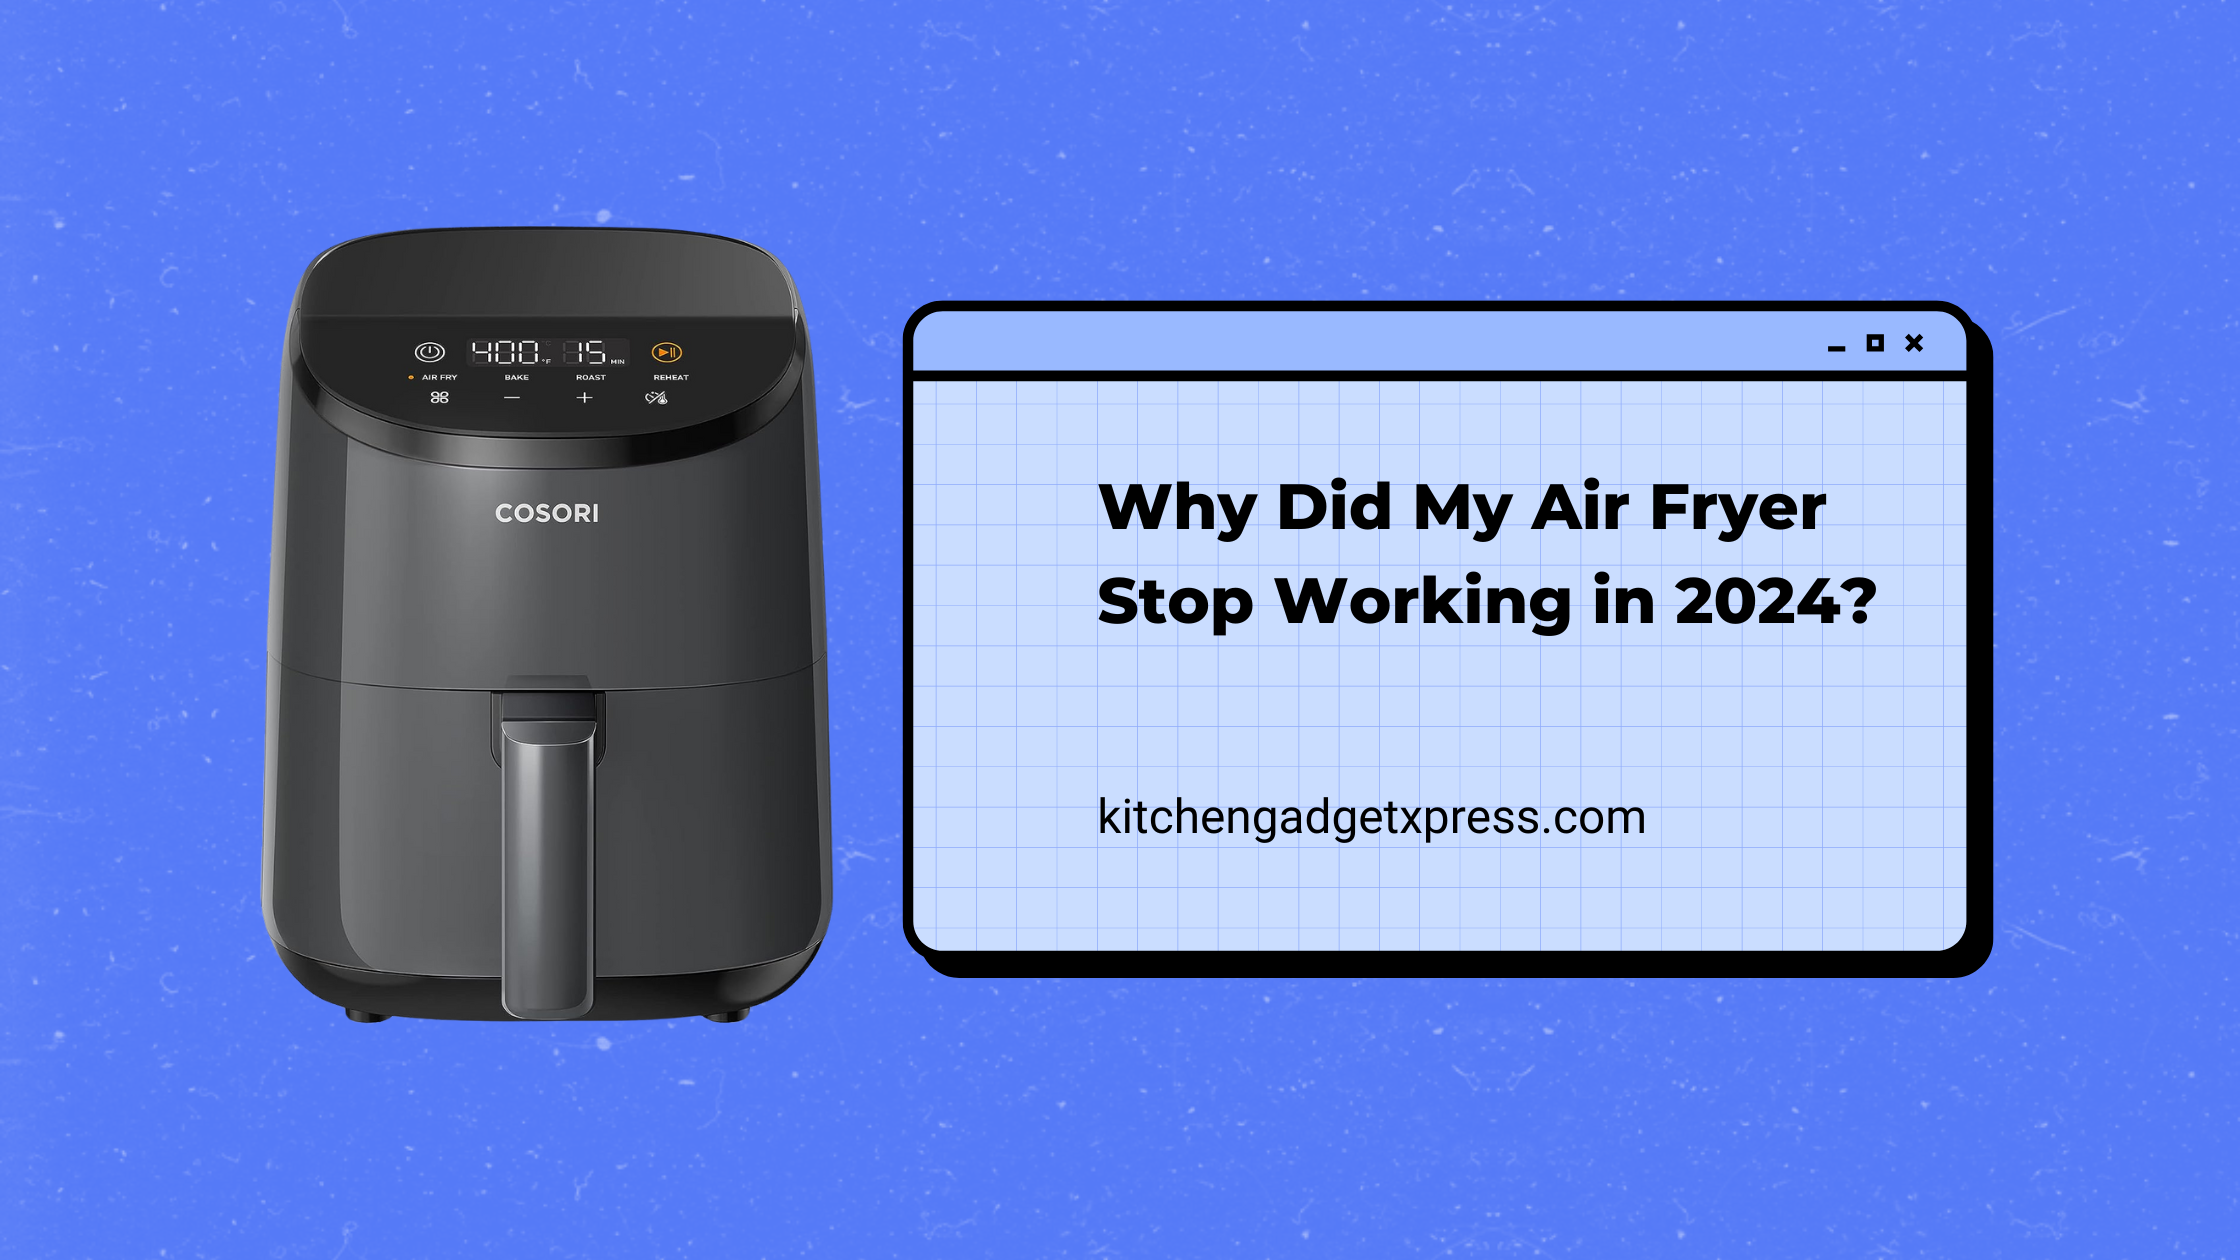 Why Did My Air Fryer Stop Working